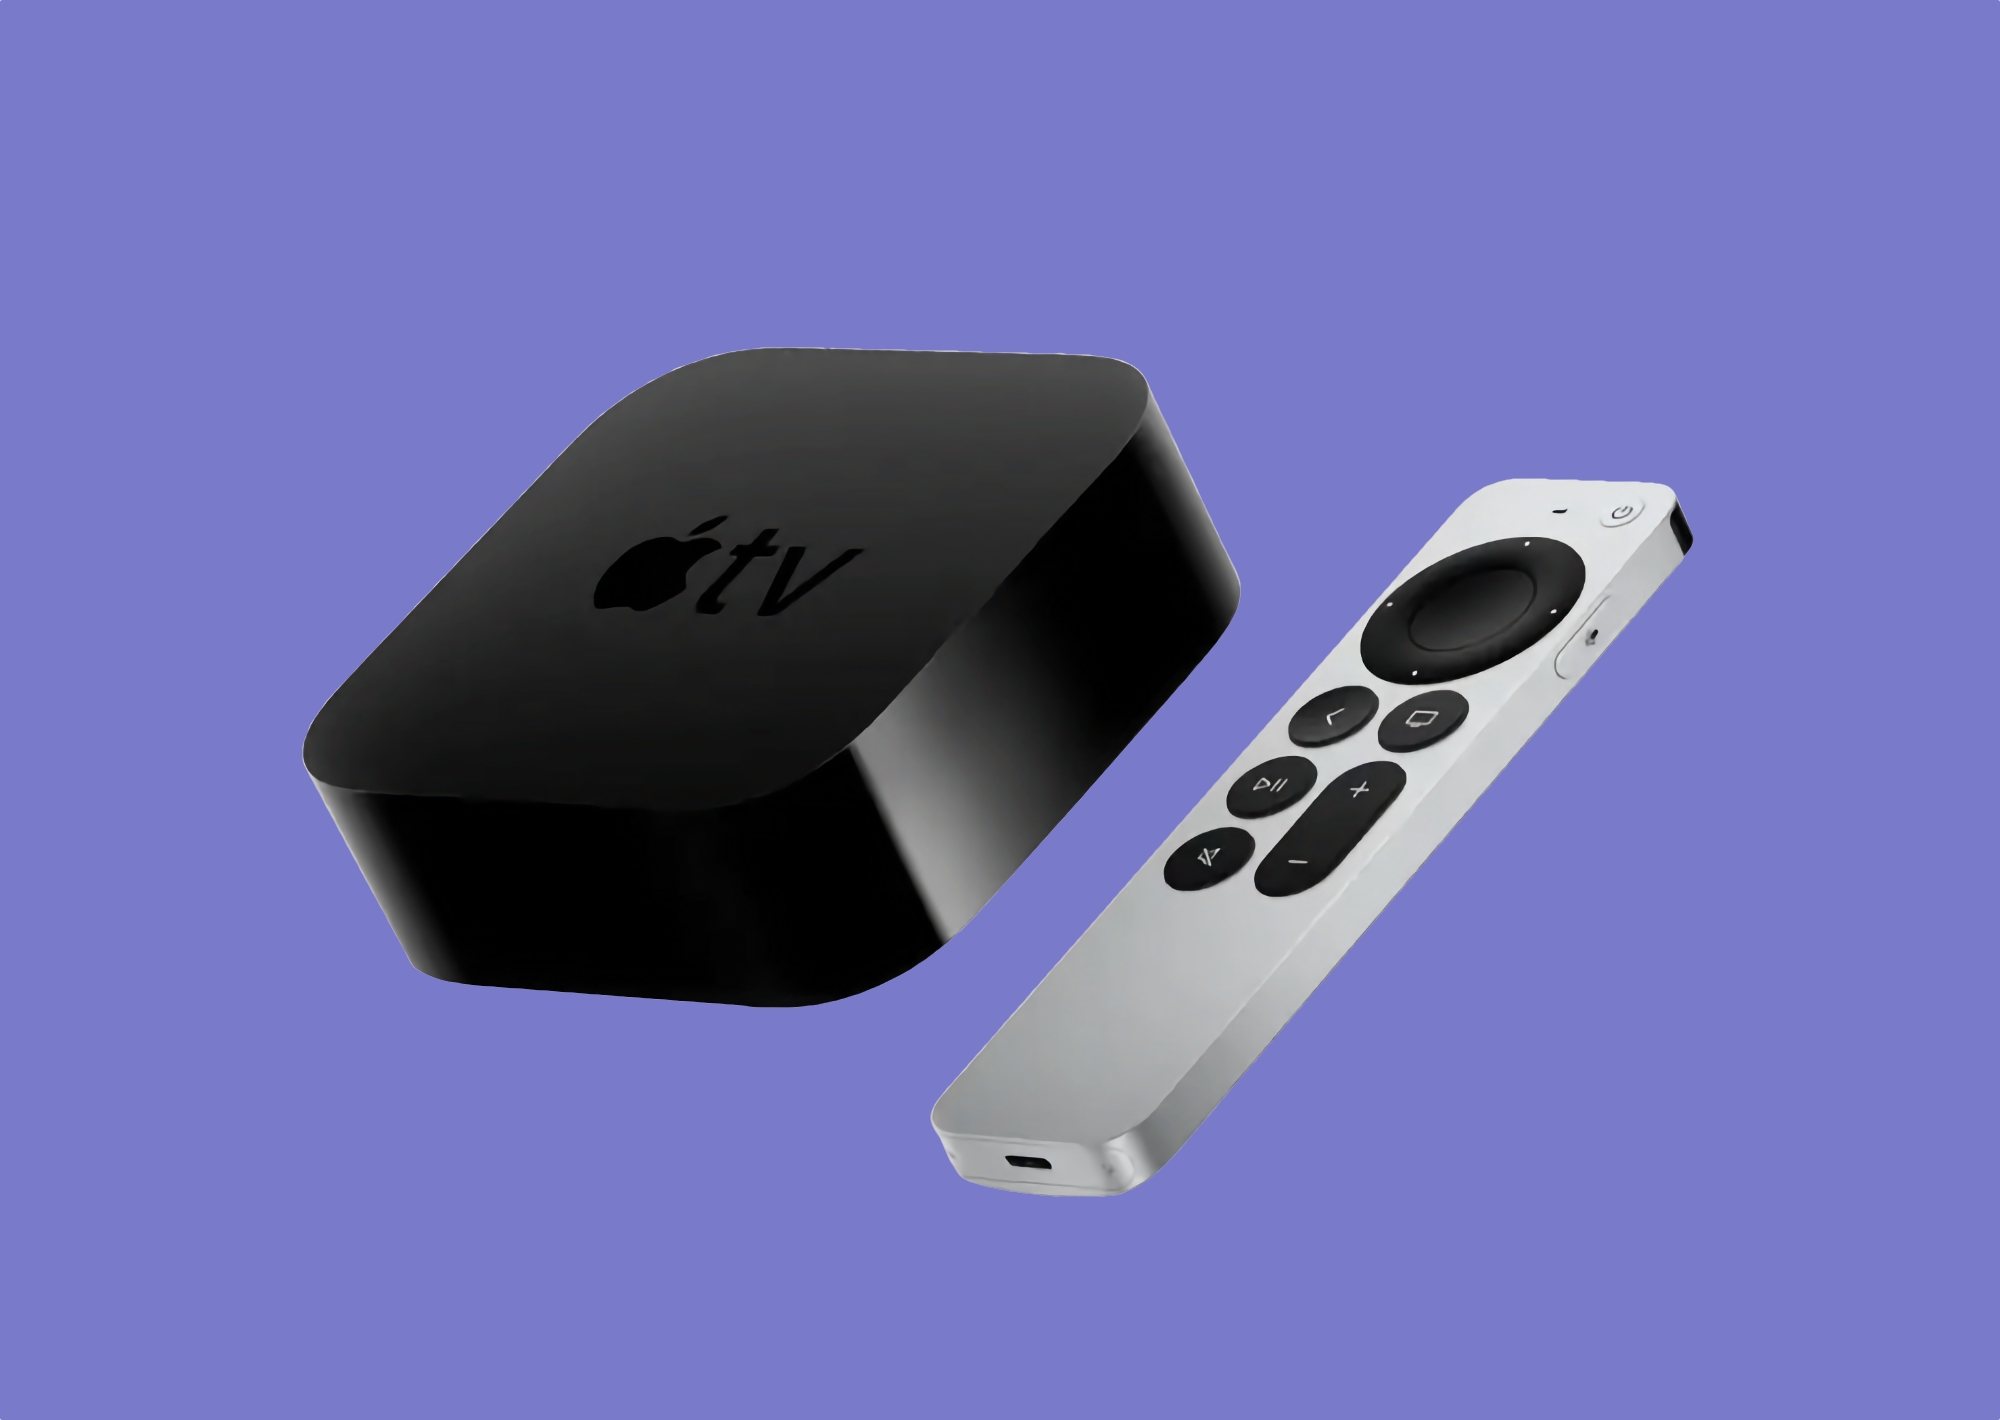 Apple TV 4K (2022) with A15 Bionic chip, USB Type-C, Ethernet, HDR10+ support and price from $129 goes on sale